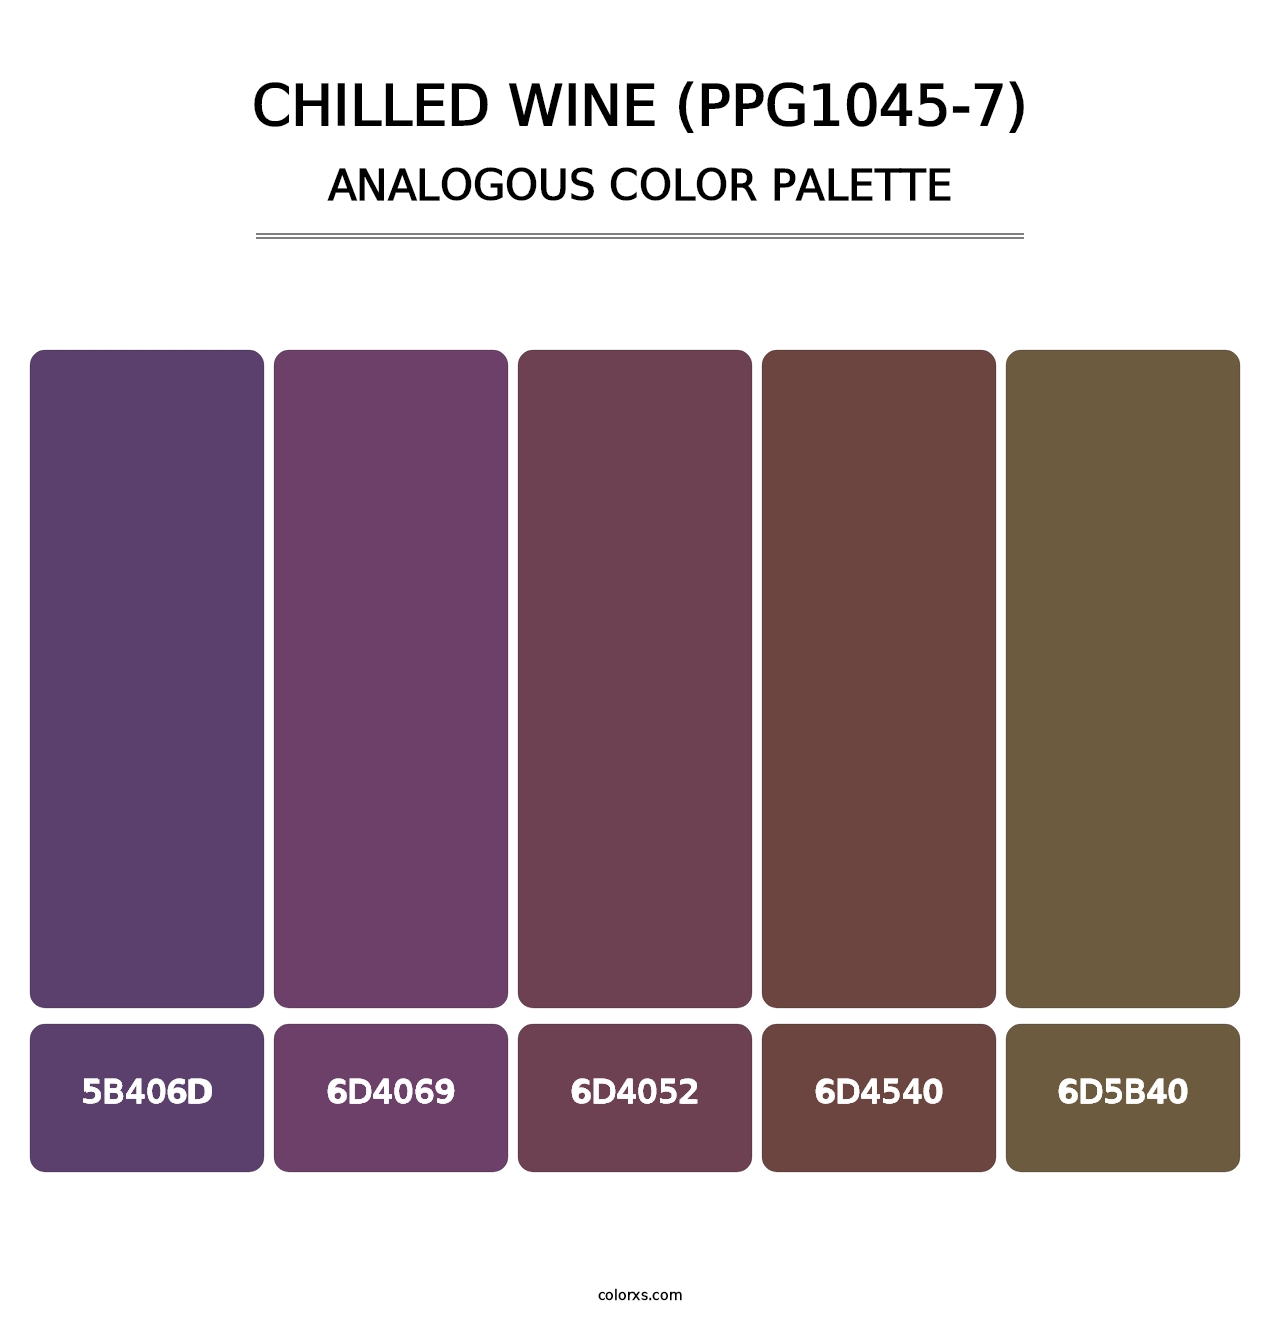 Chilled Wine (PPG1045-7) - Analogous Color Palette